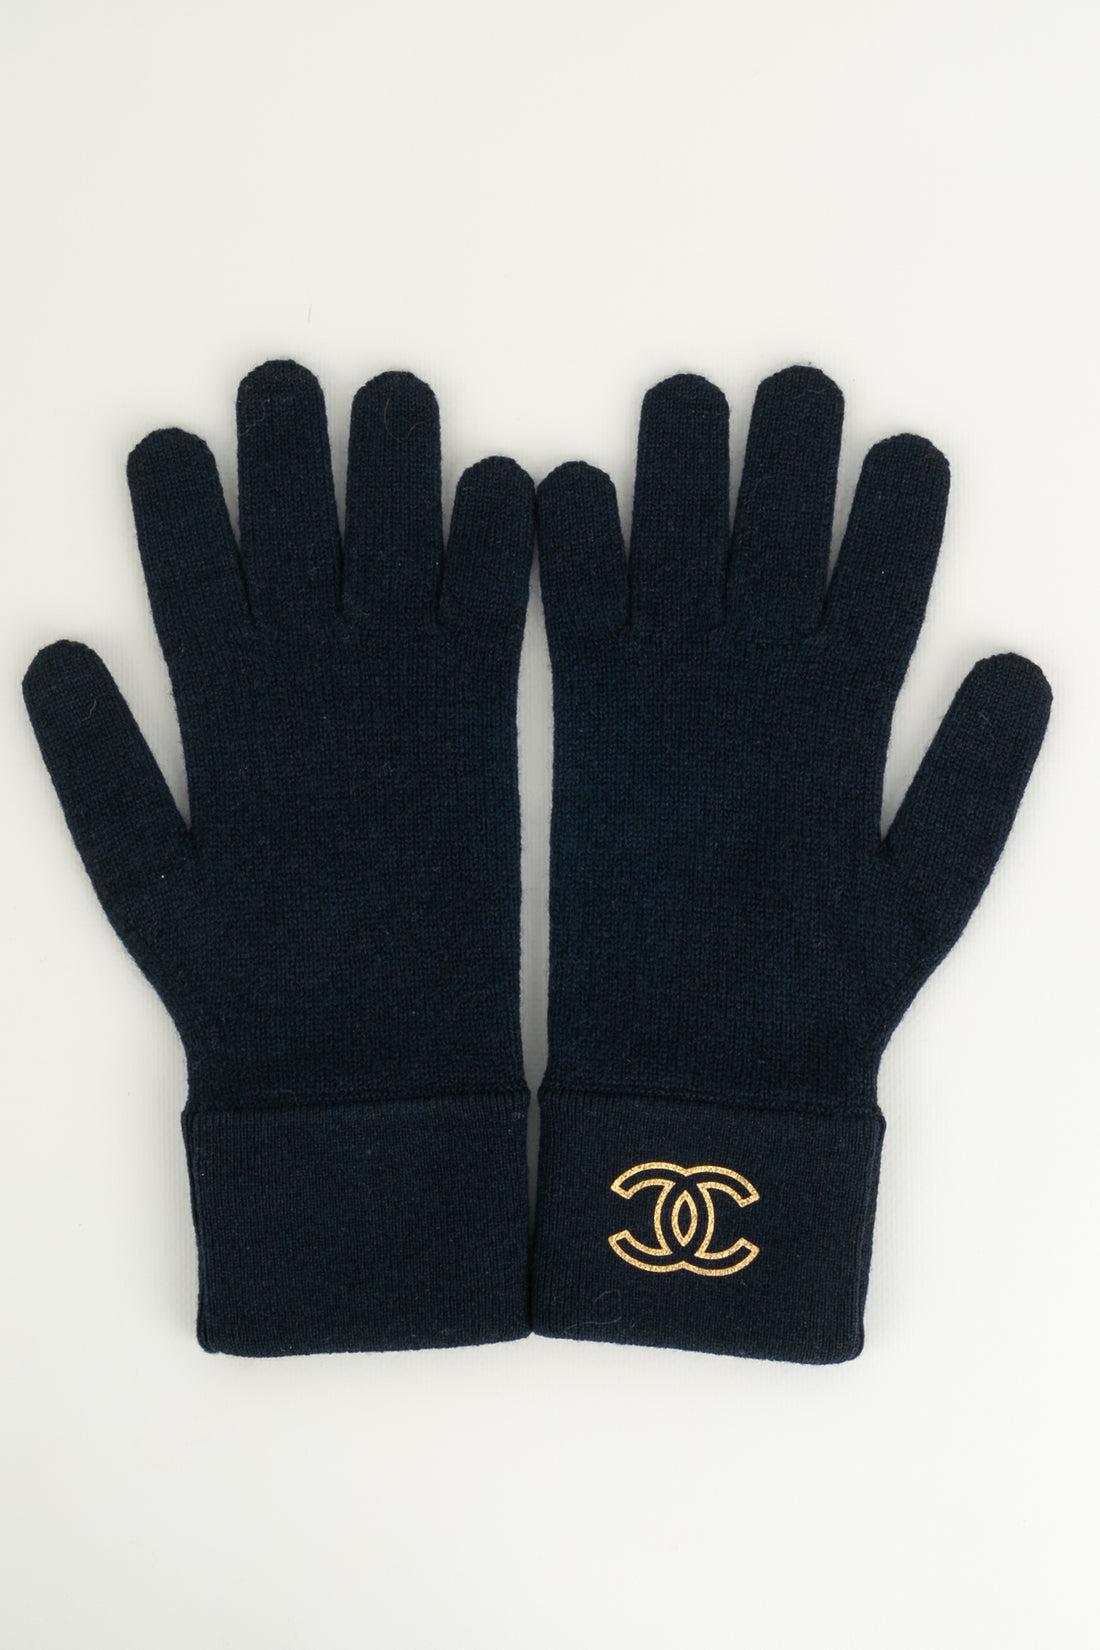 Chanel - Cashmere set consisting of a scarf, a pair of gloves and a blue cashmere hat. Label of composition missing.

Additional information: 
Dimensions: Scarf: 39 cm x 240 cm
Condition: Very good condition
Seller Ref number: FFC11